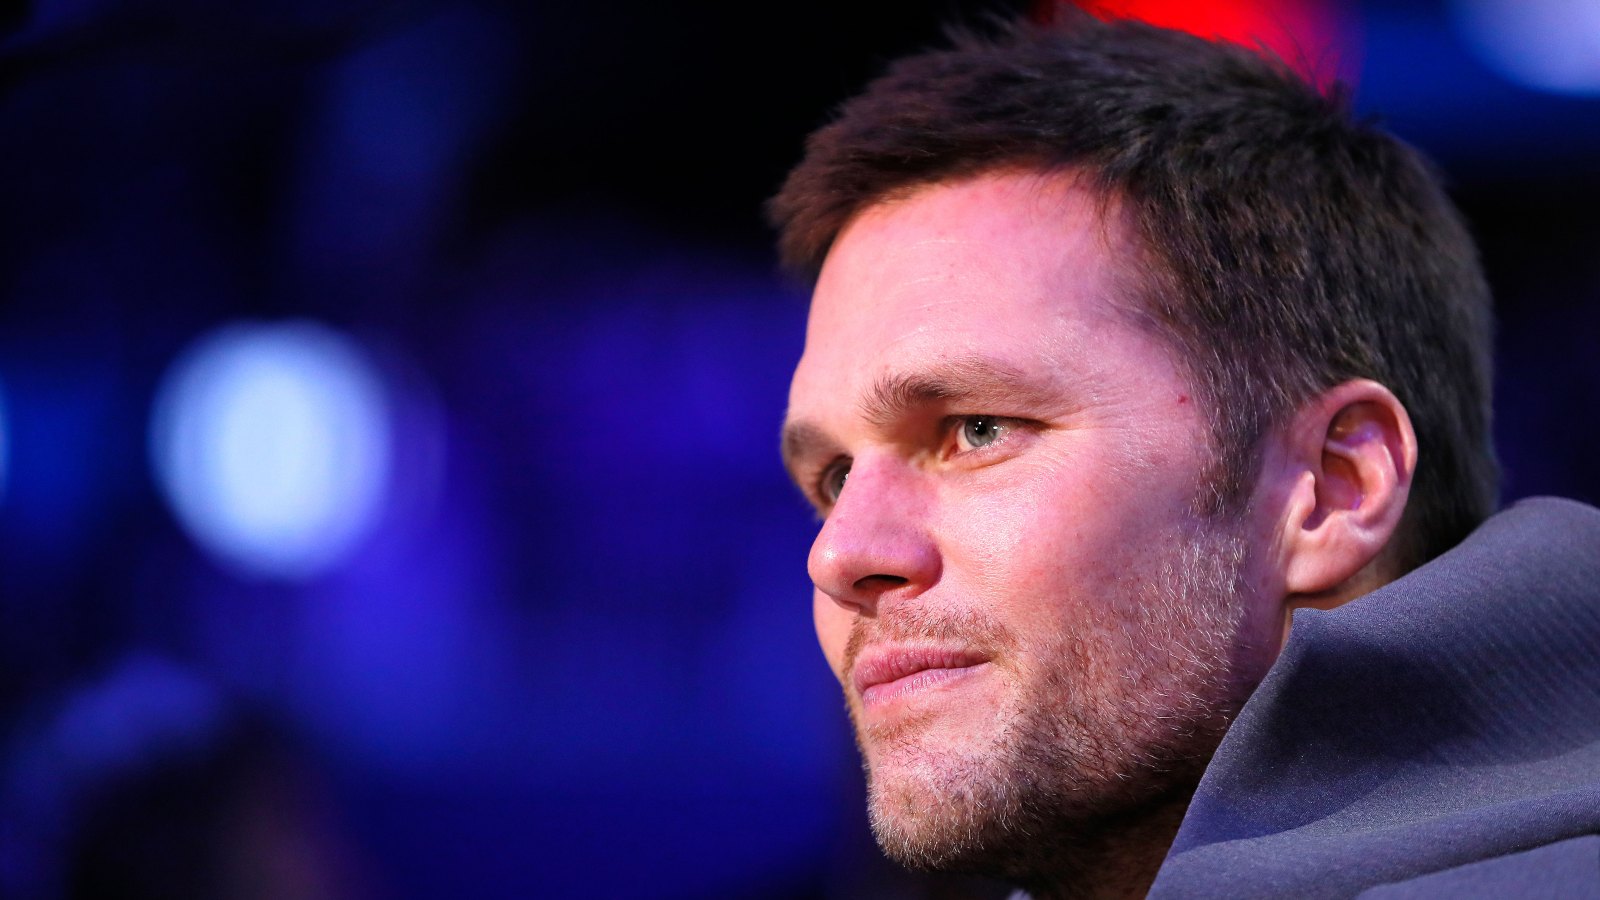 Pittsburgh TV Station Refers to Tom Brady as a ‘Known Cheater’ Ahead of Super Bowl